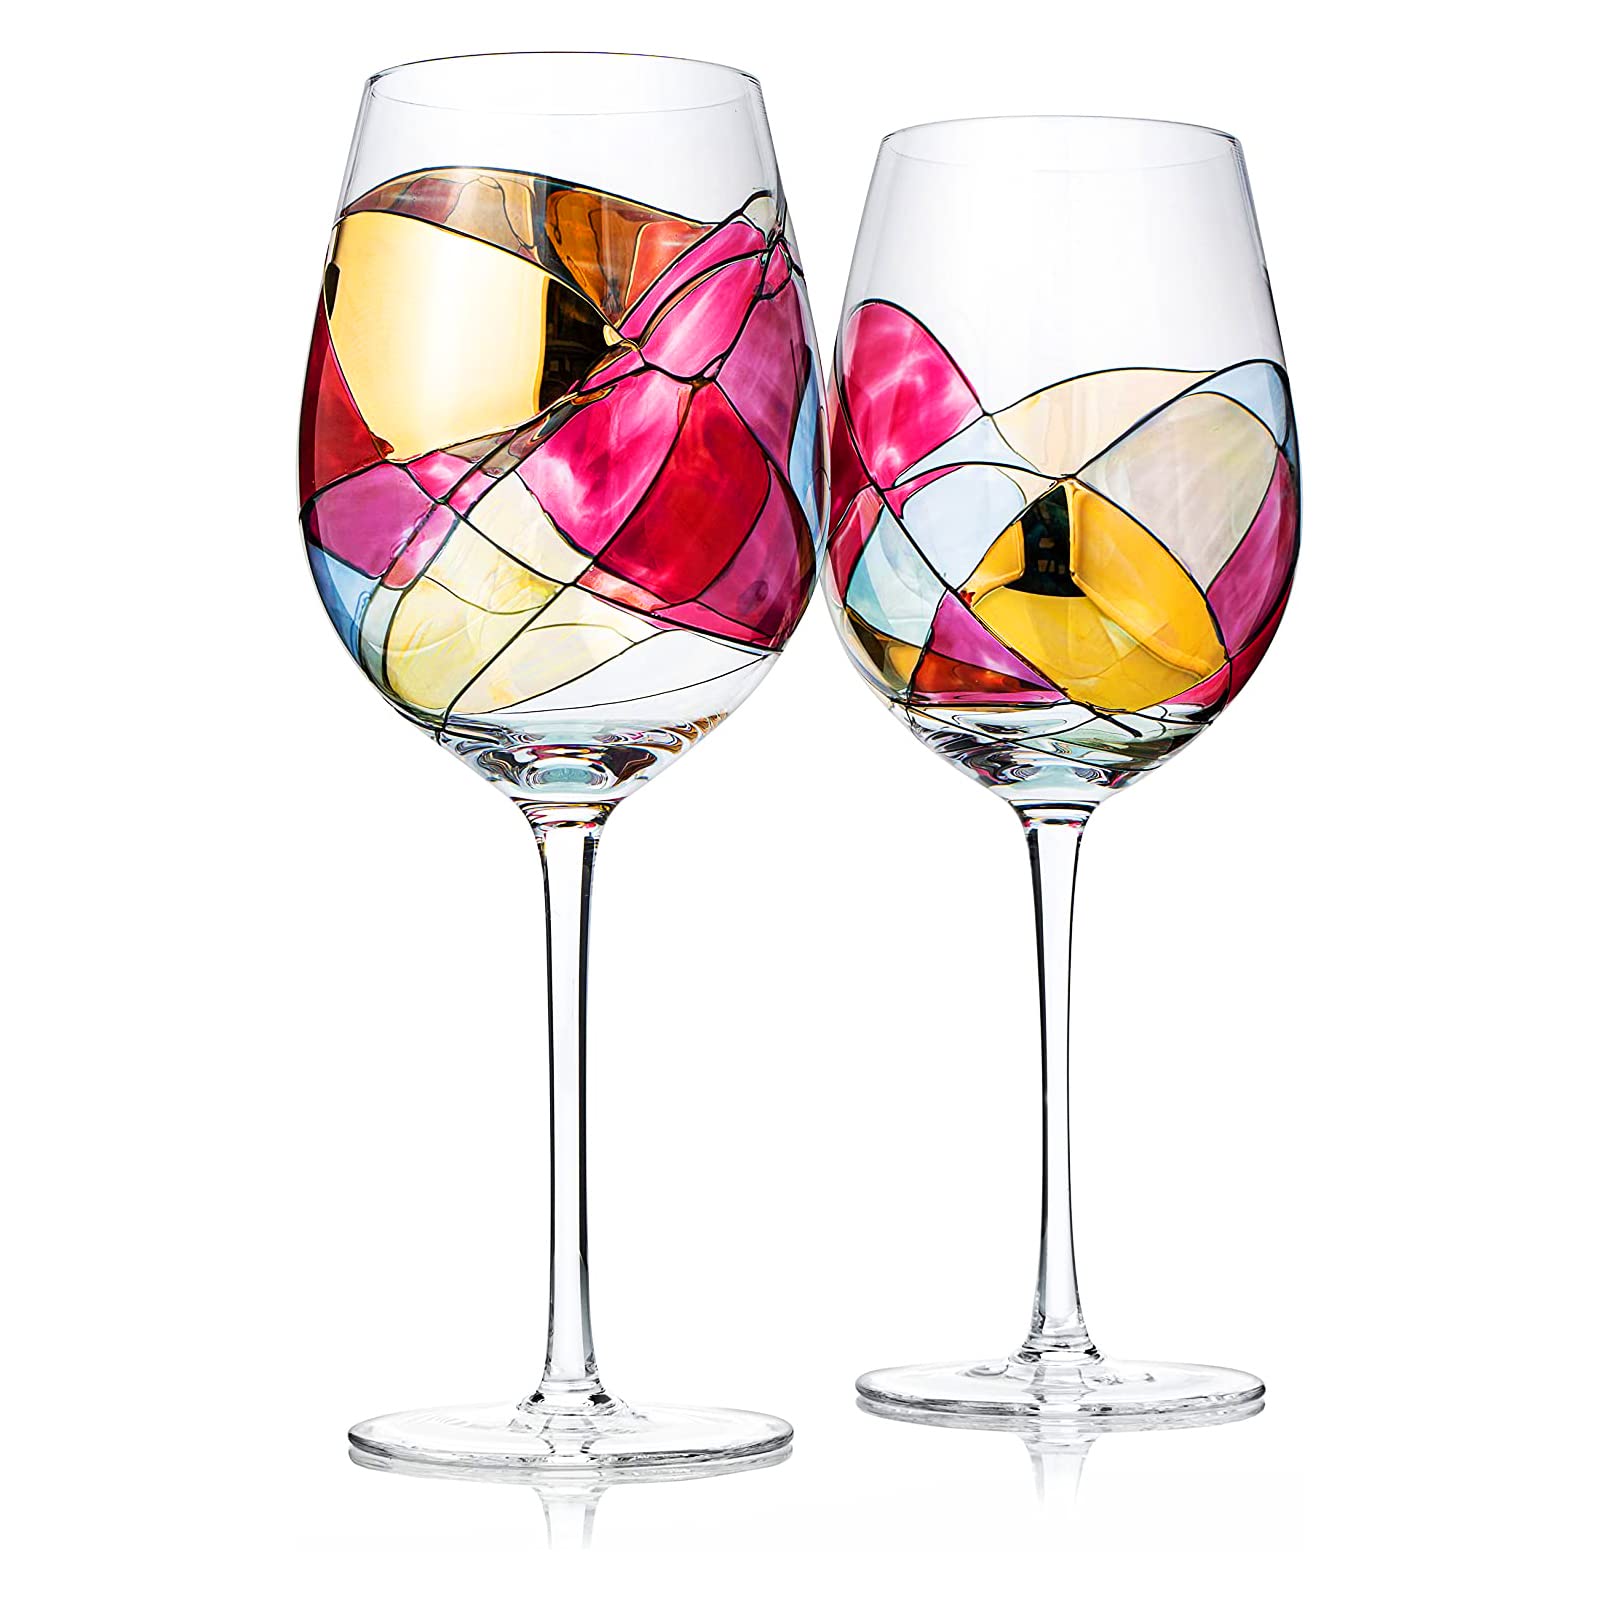 The Wine Savant Artisanal Hand Painted Renaissance Romantic Stain-glassed Windows Wine Glasses Set of 2 - Gift Idea for Her, Him